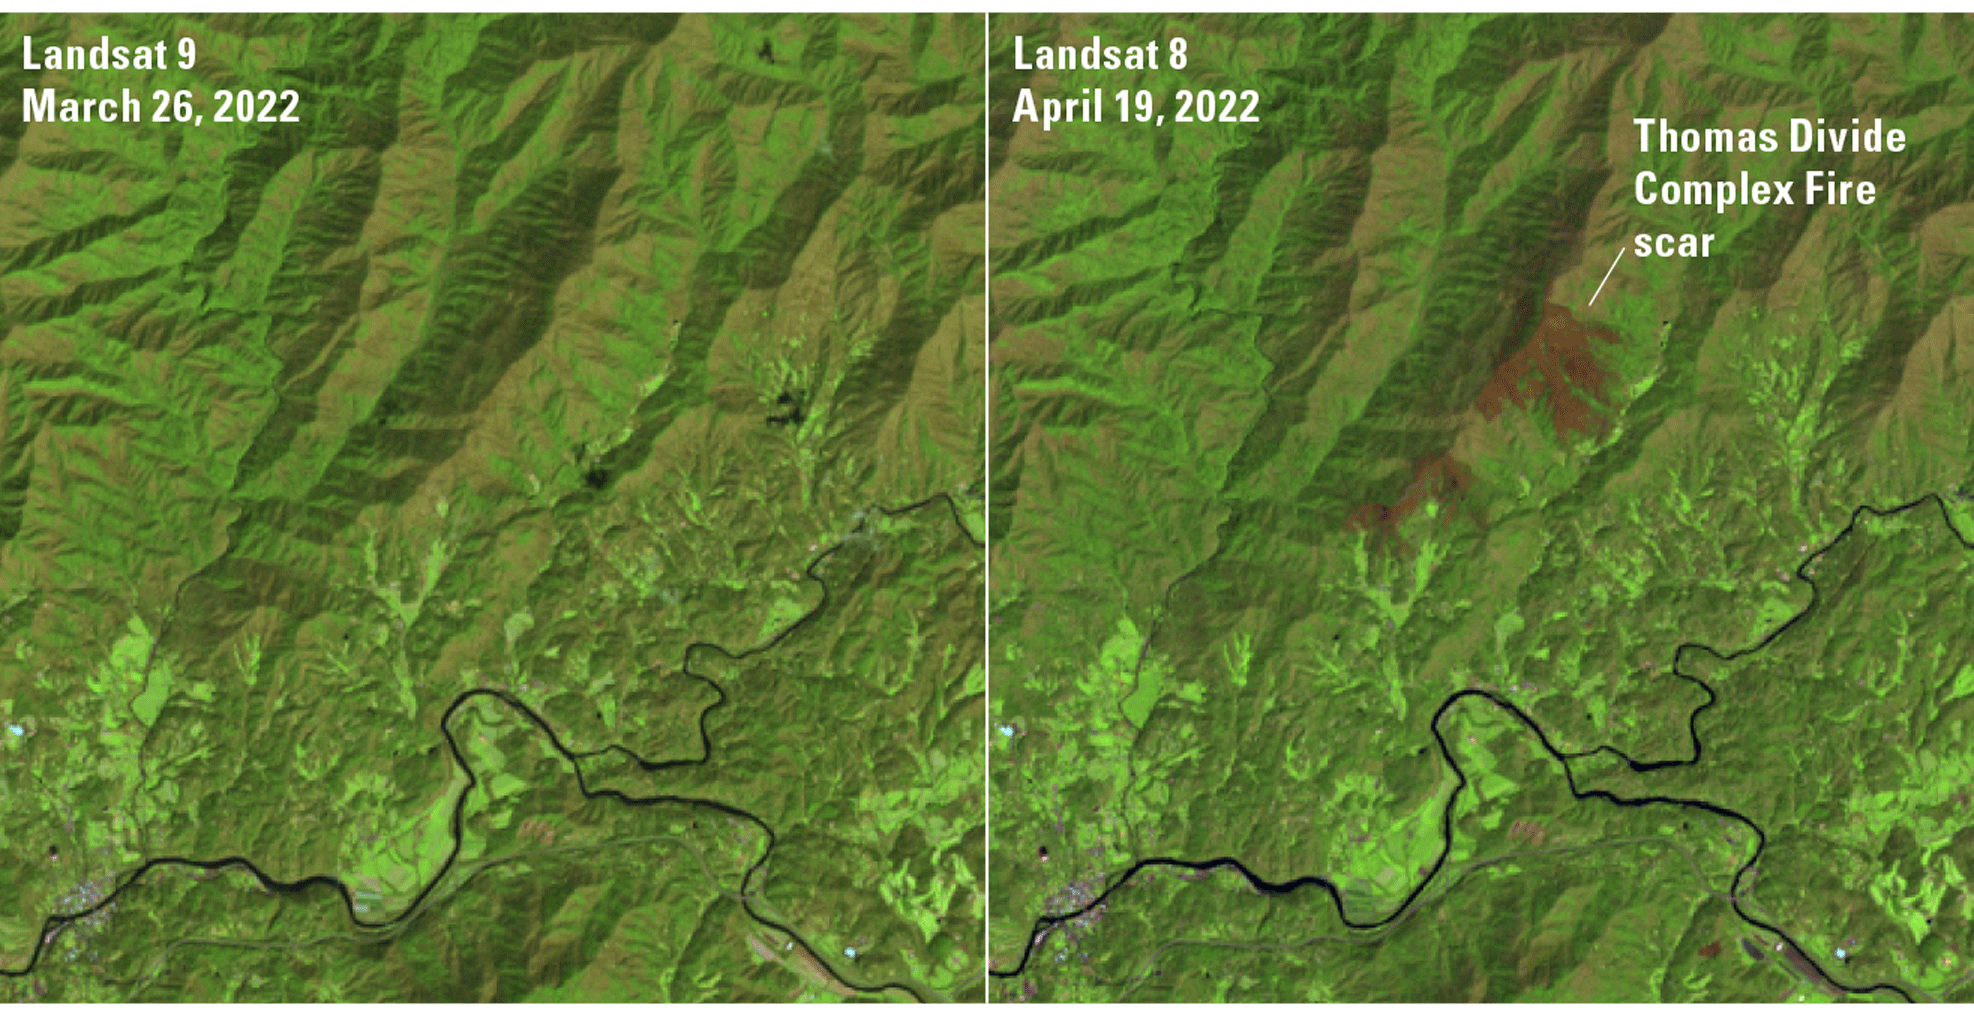 The fire scar is visible in map of the Great Smoky Mountain National Park region from
                     April 19, 2022.